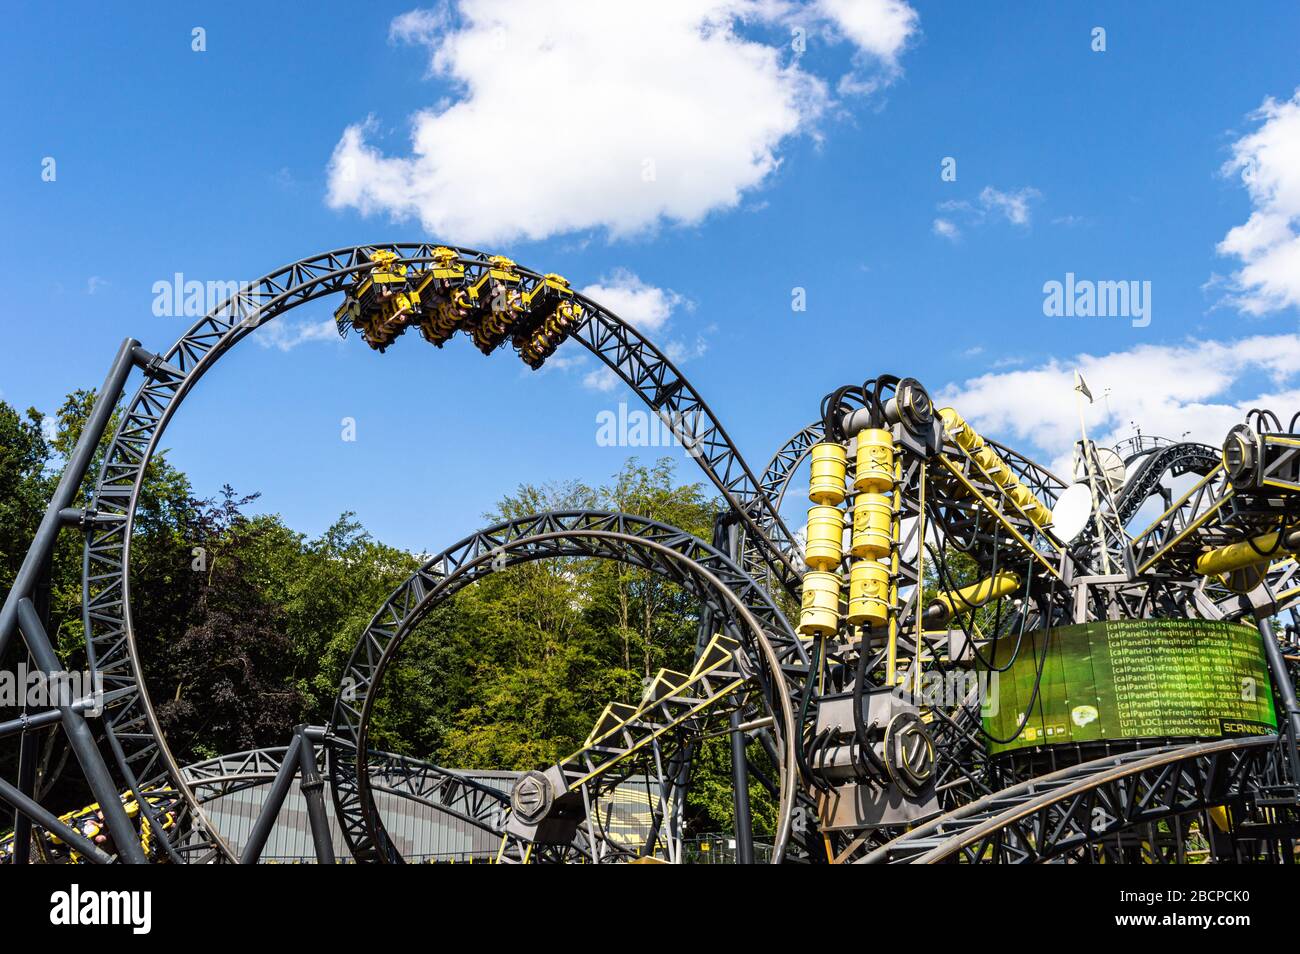 The Smiler at Alton Towers Theme park, UK. Yellow cars fly round the track which has world record 14 inversions. 3 minutes long with a vertical lift Stock Photo